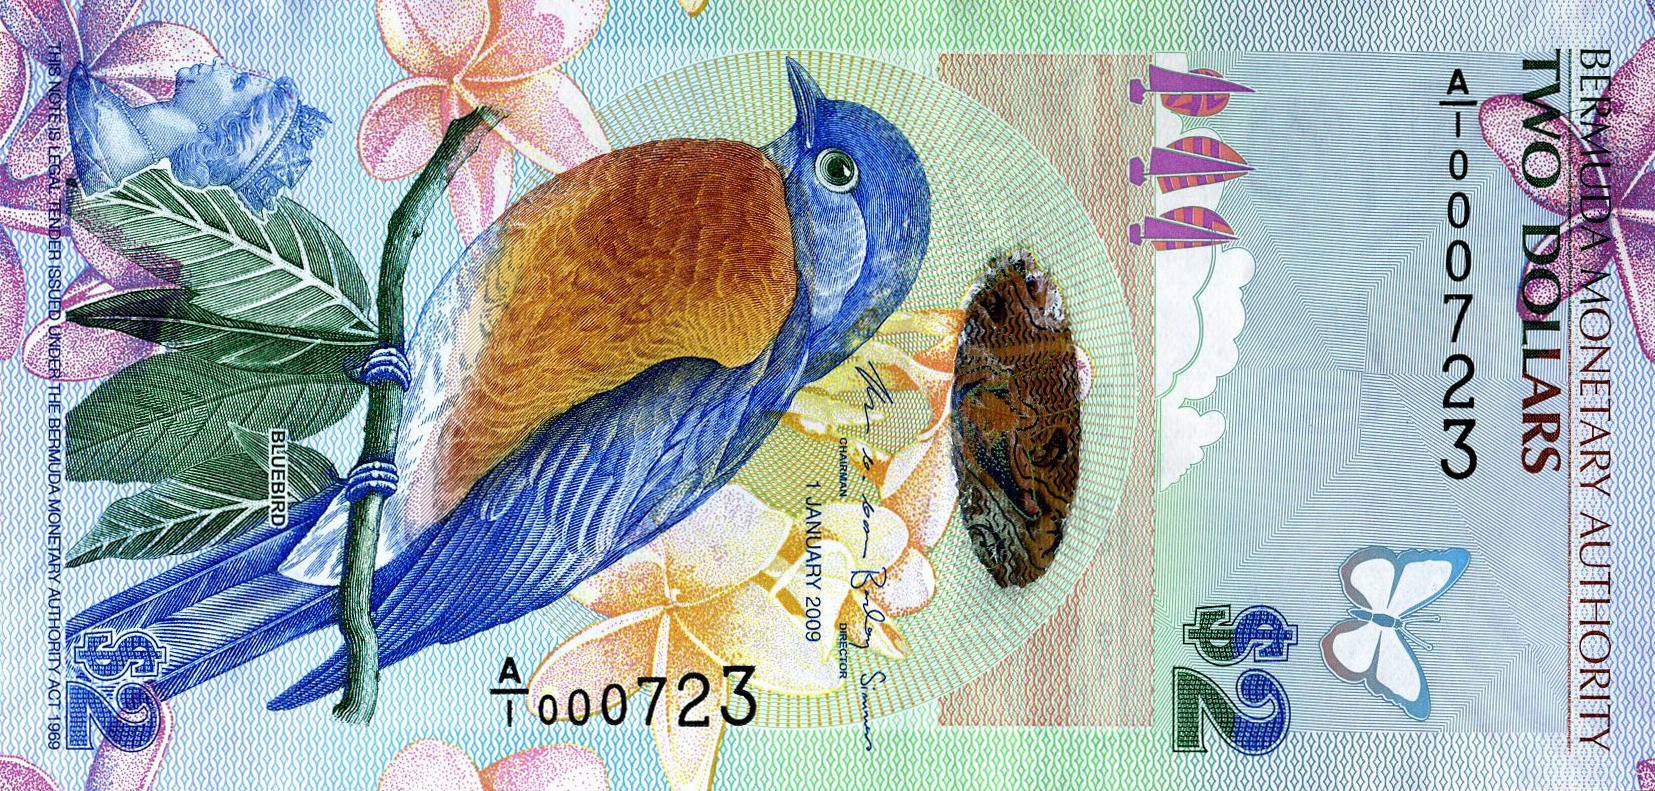 Bermuda 2-dollar note (B230a) named IBNS Banknote of the Year – BanknoteNews